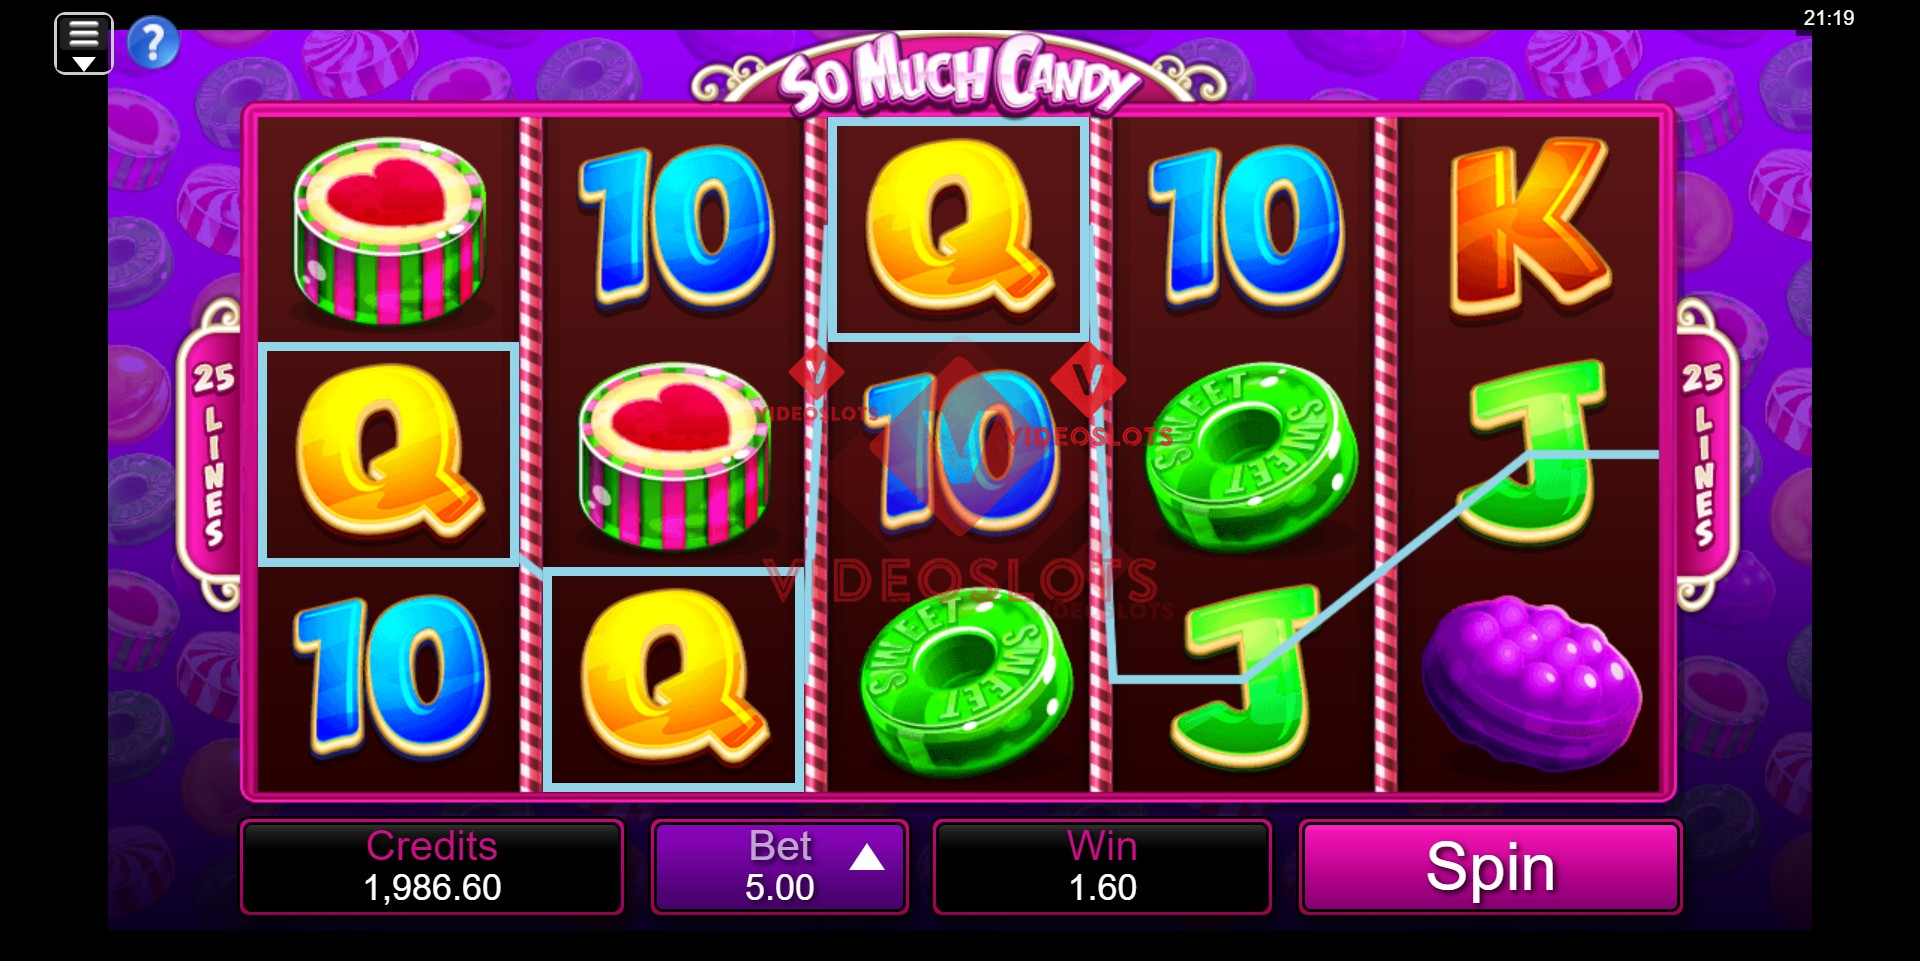 Base Game for So Much Candy slot for Microgaming